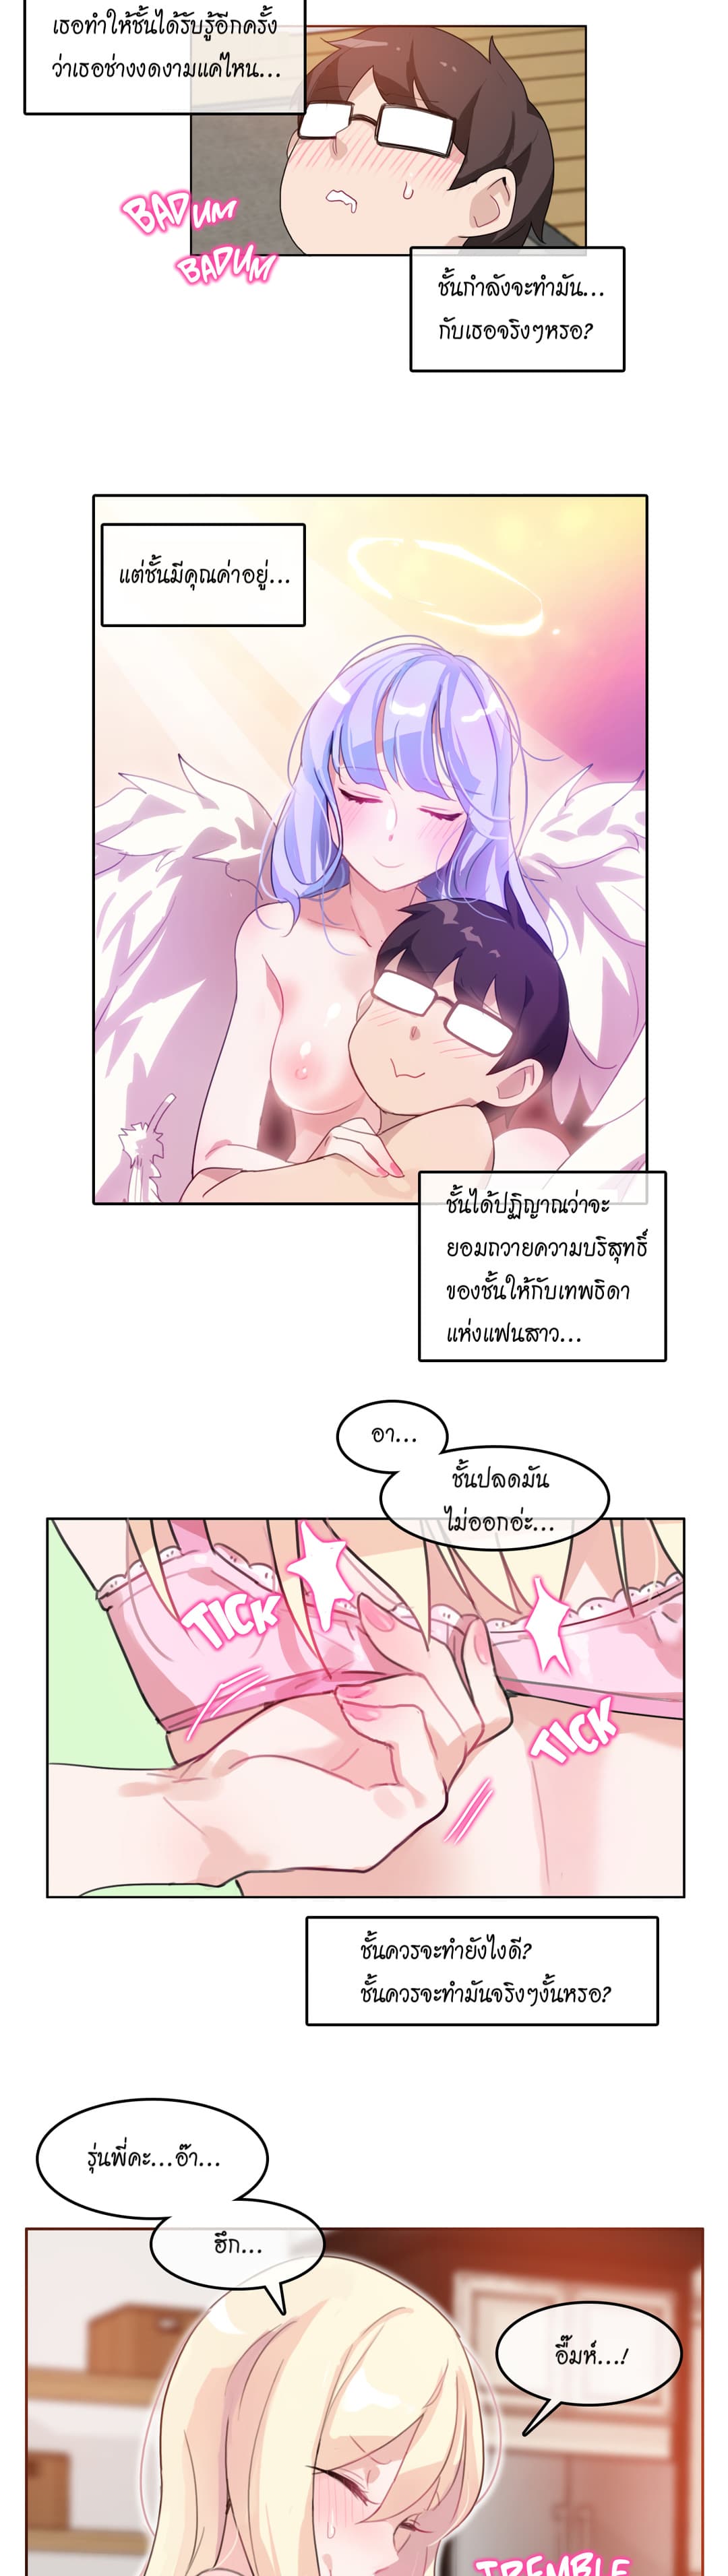 A Pervert’s Daily Life 11 (4)